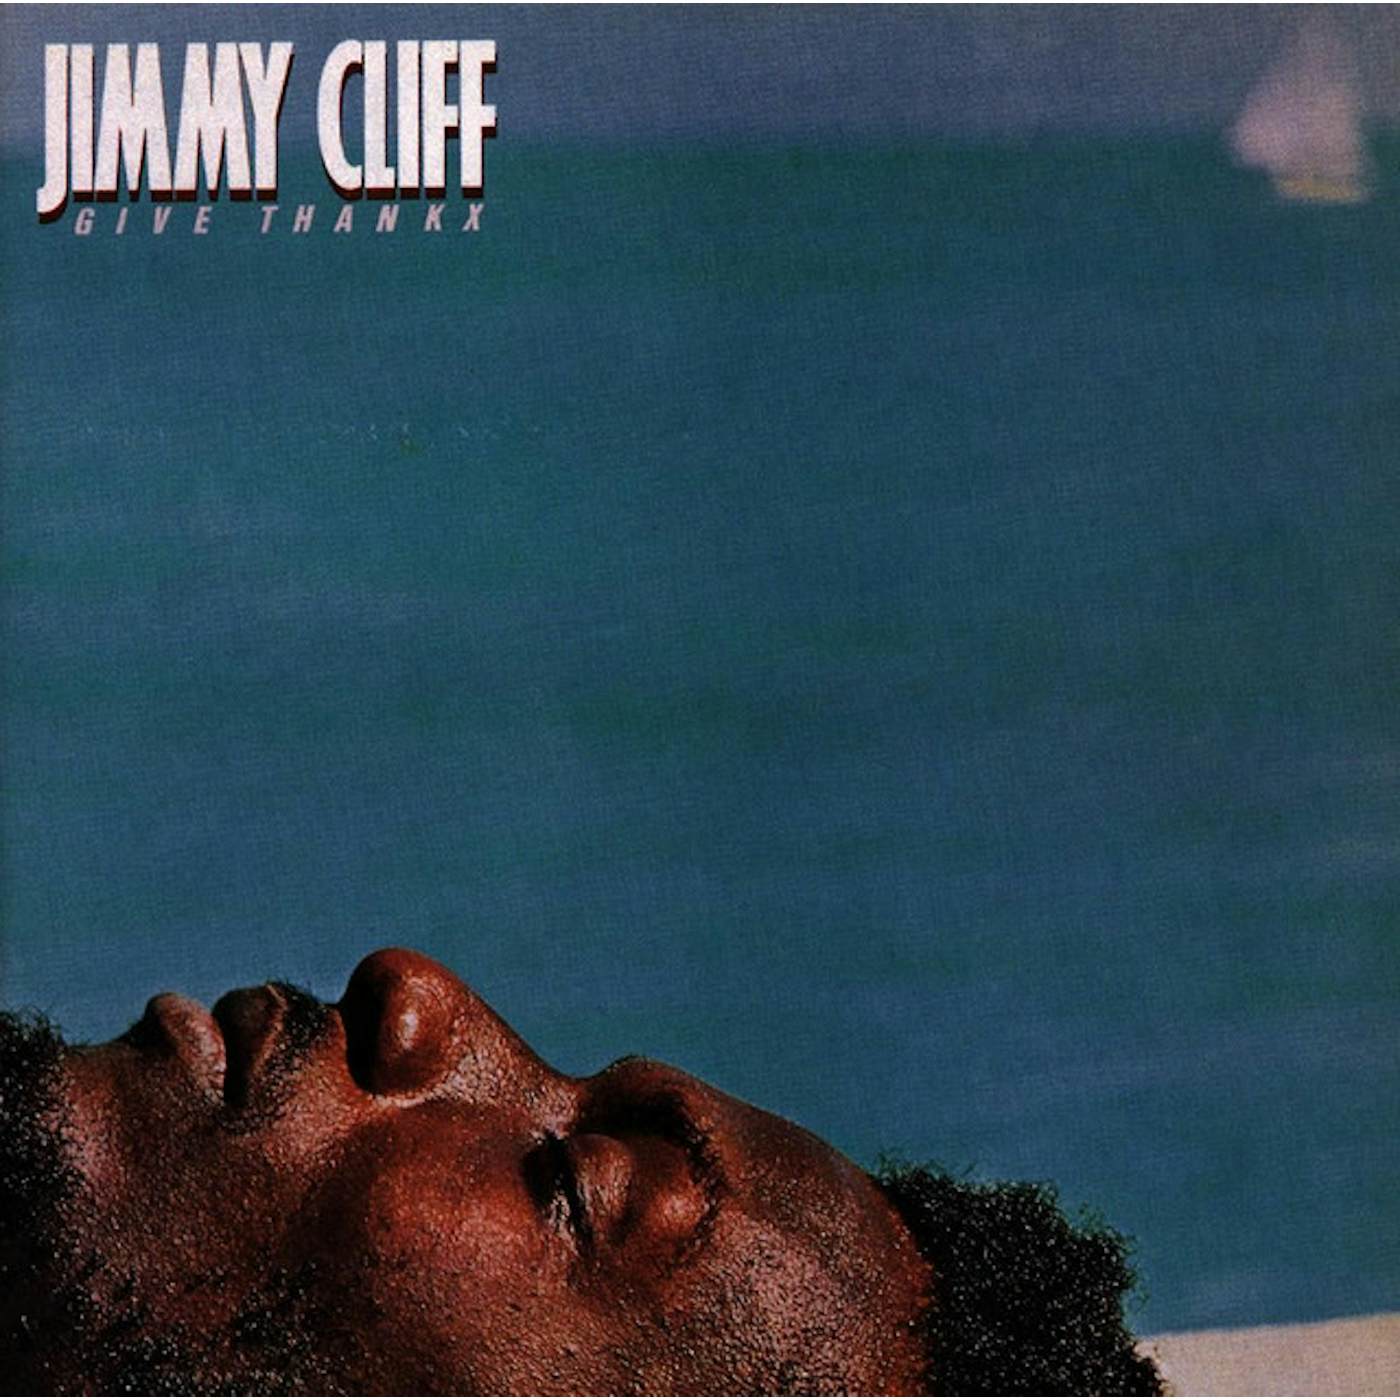 Jimmy Cliff GIVE THANX CD